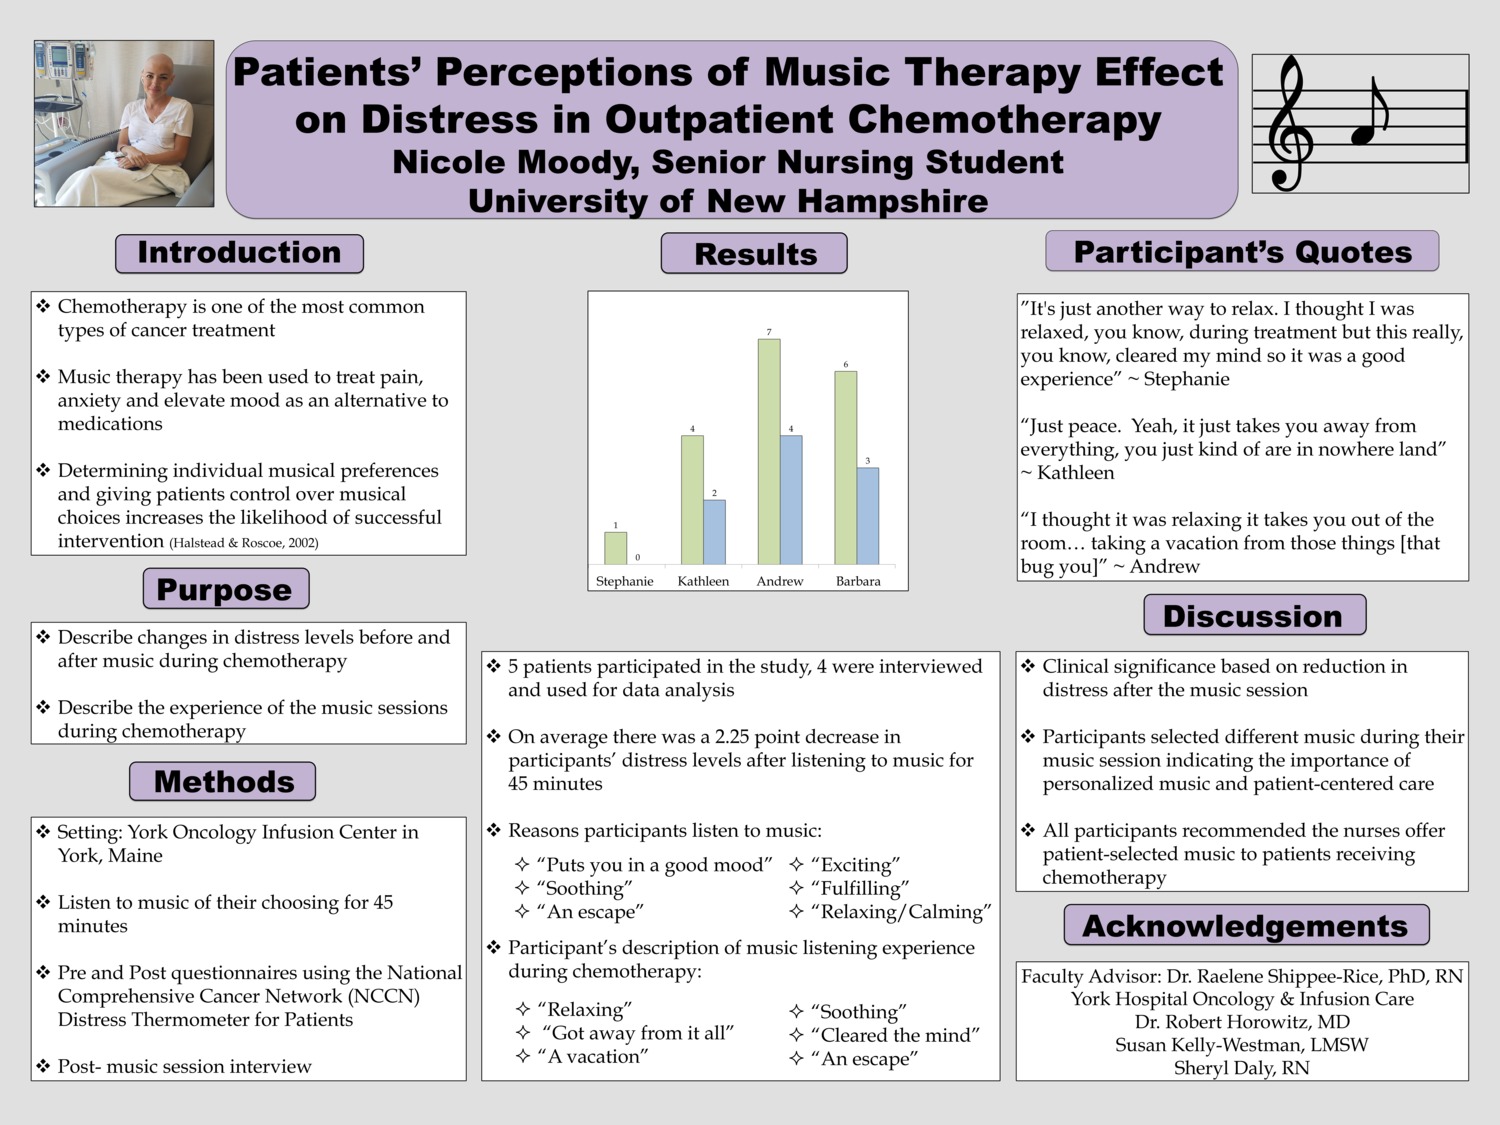 Patients’ Perceptions Of Music Therapy Effect On Distress In Outpatient Chemotherapy by nm2002